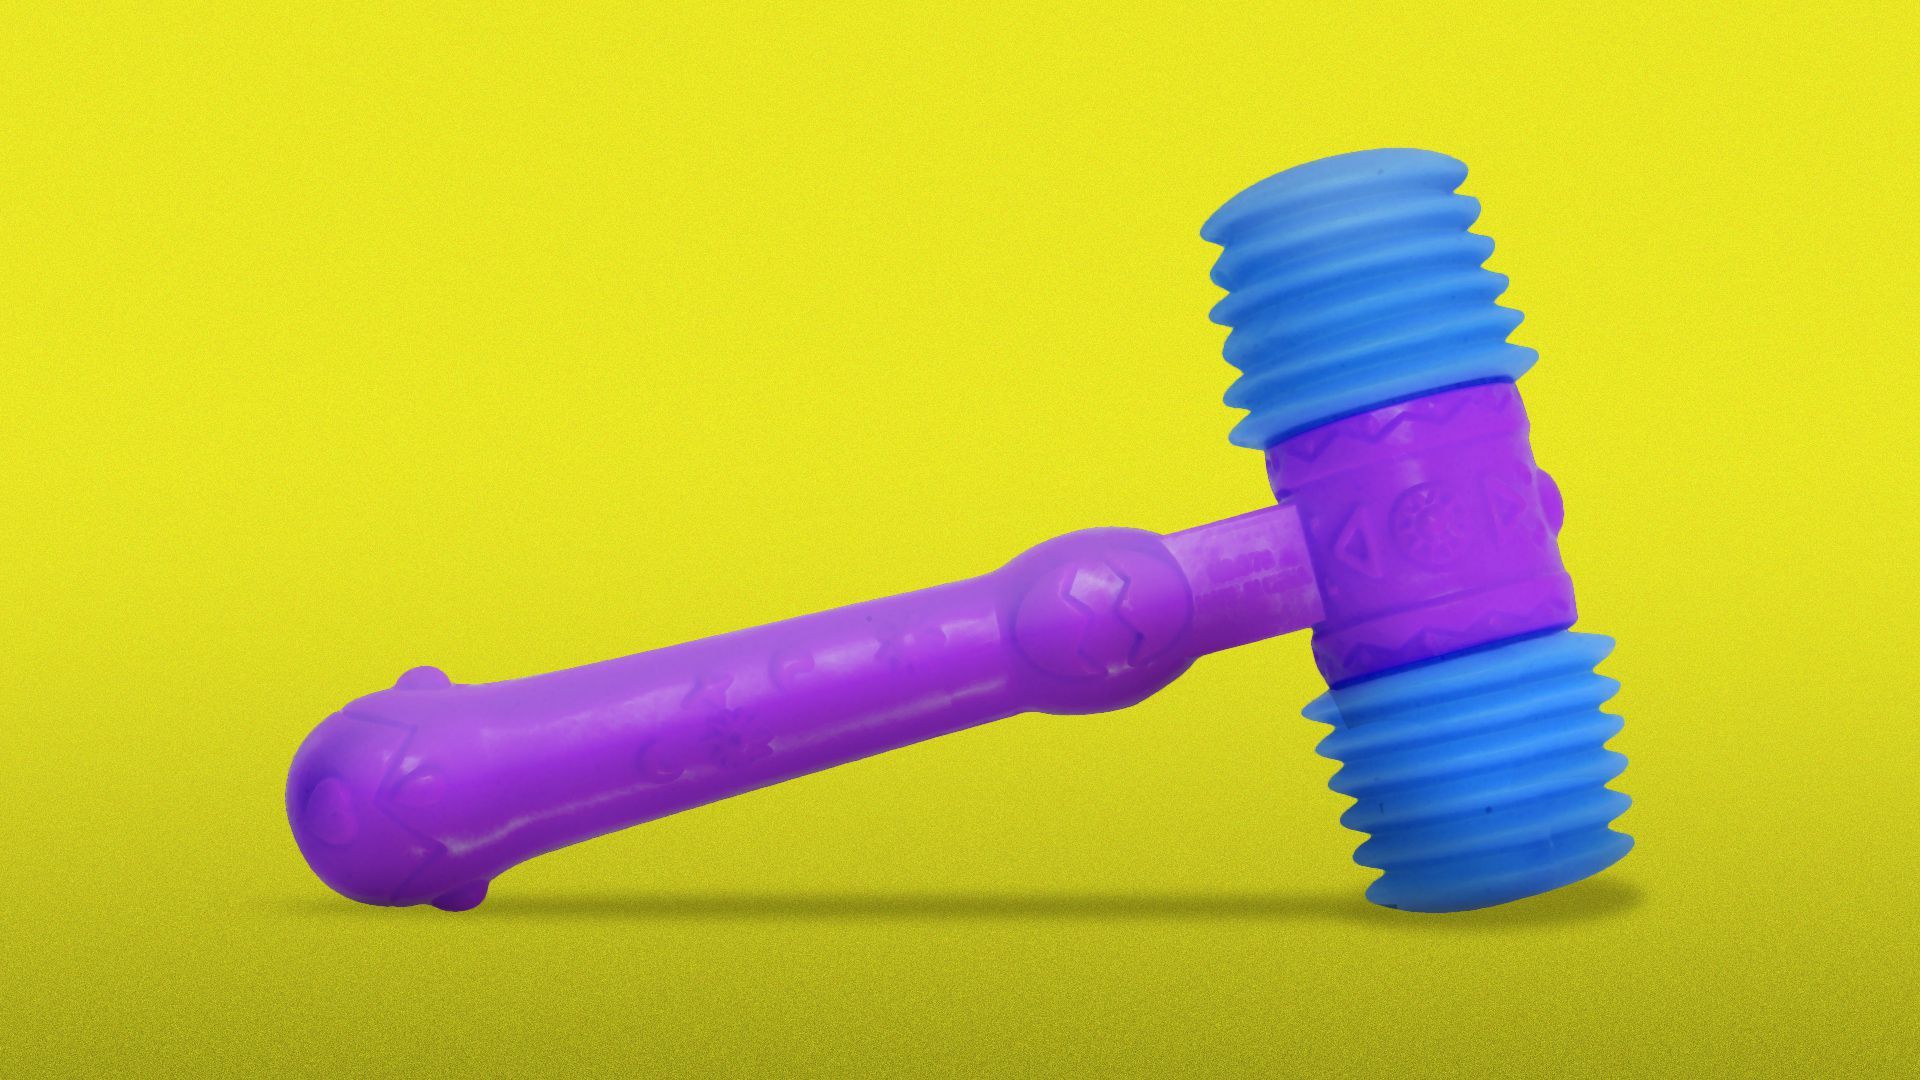 Illustration of a colorful toy gavel.